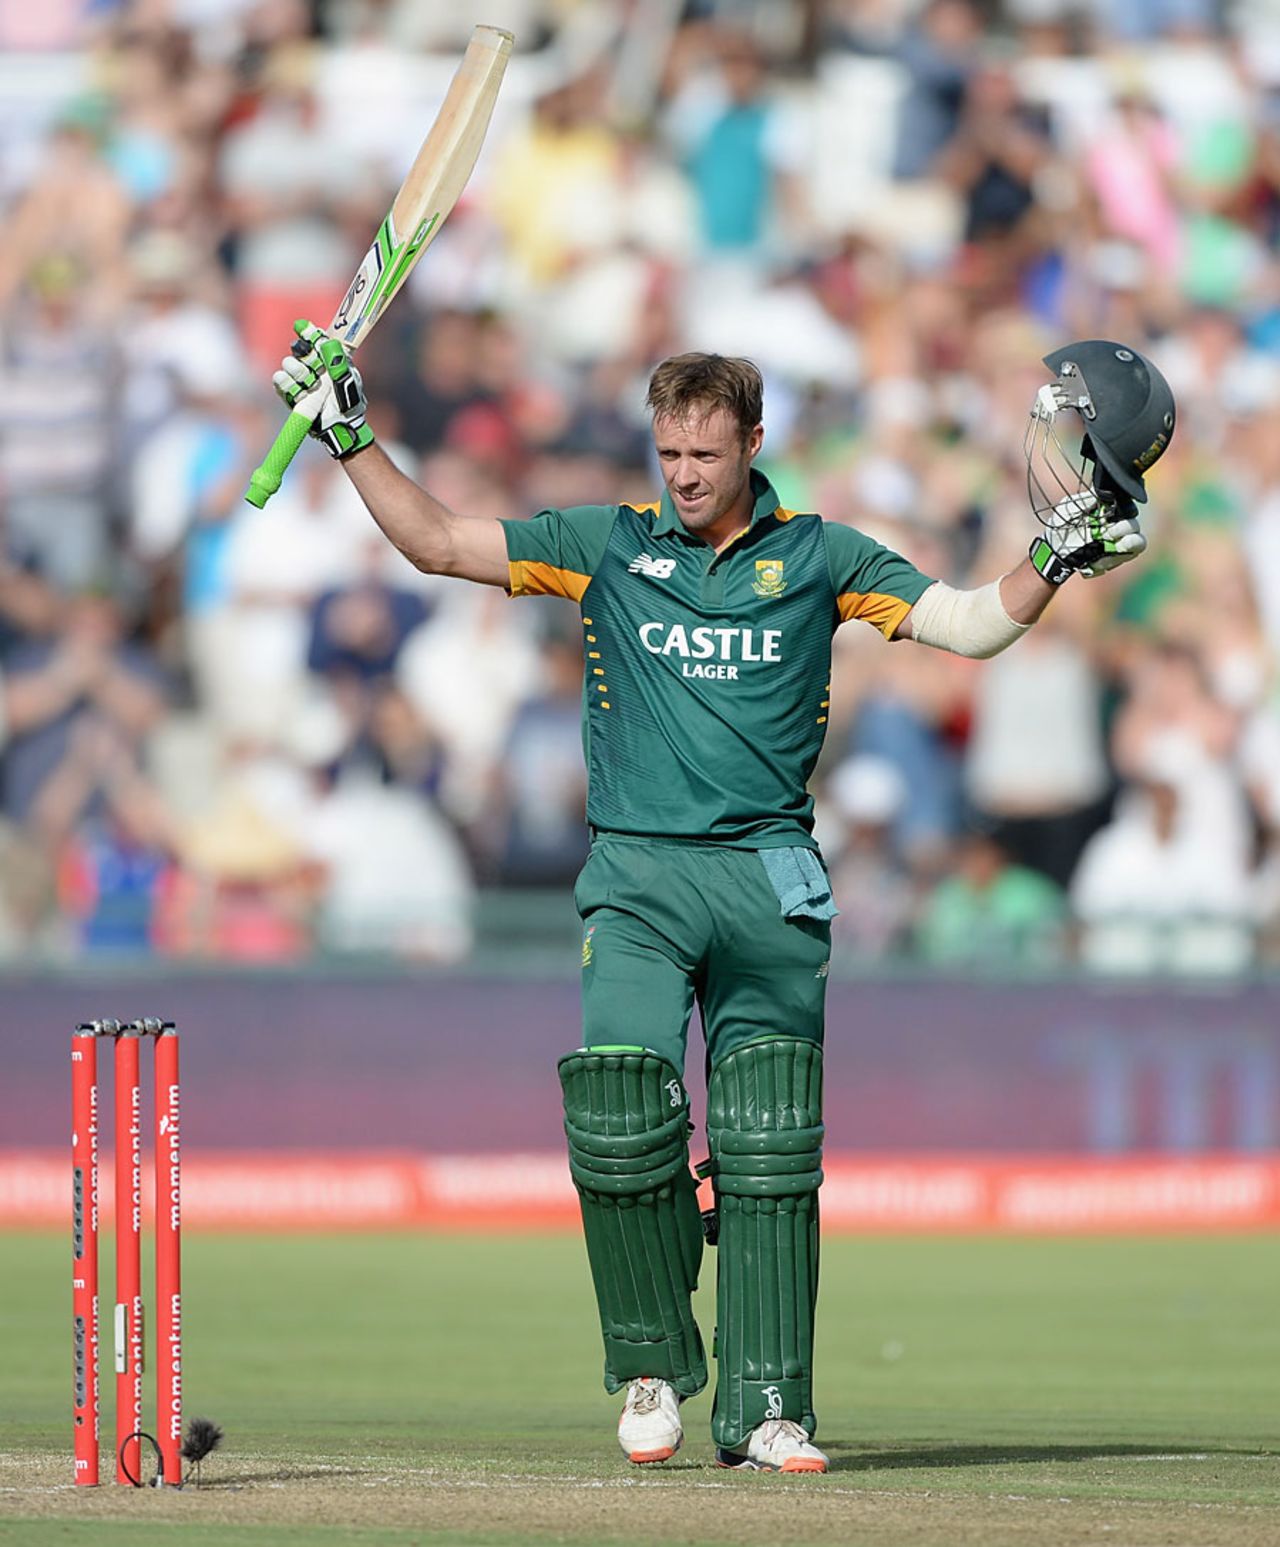 AB de Villiers celebrates his hundred, South Africa v England, 5th ODI, Cape Town, February 14, 2016